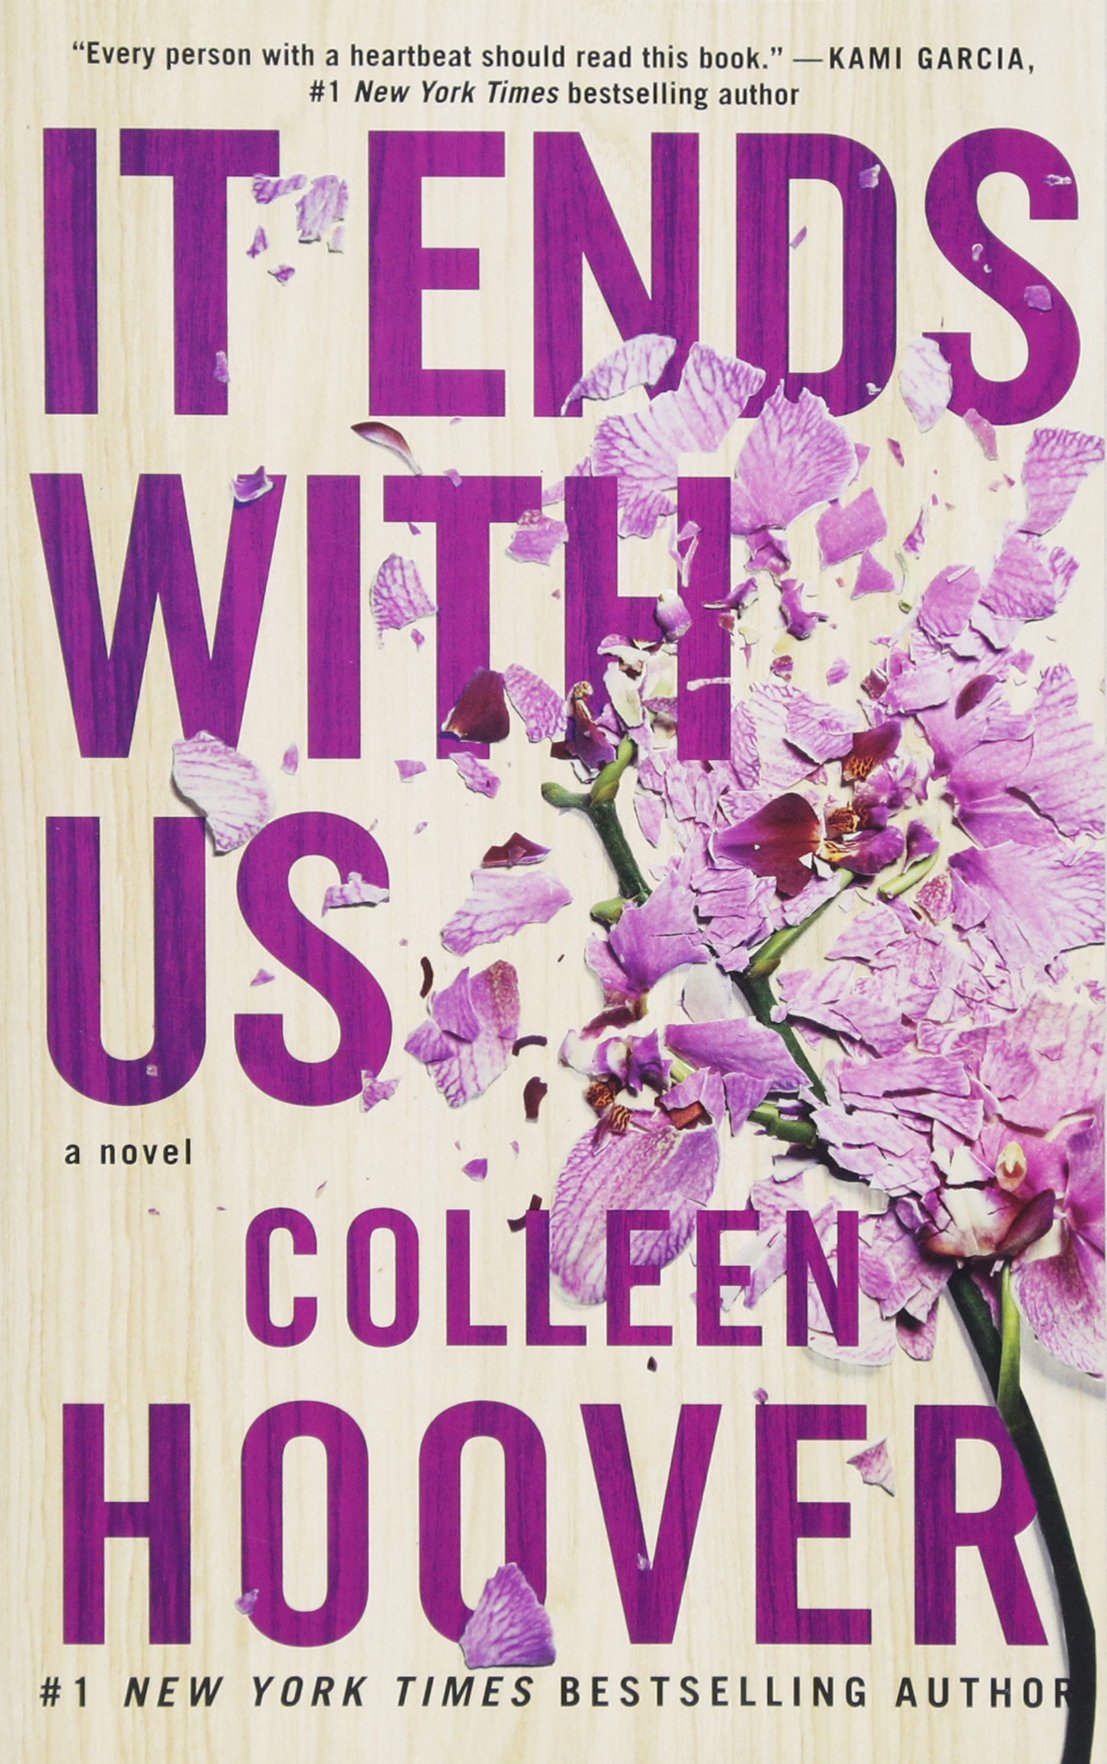 It Ends with Us: A Novel